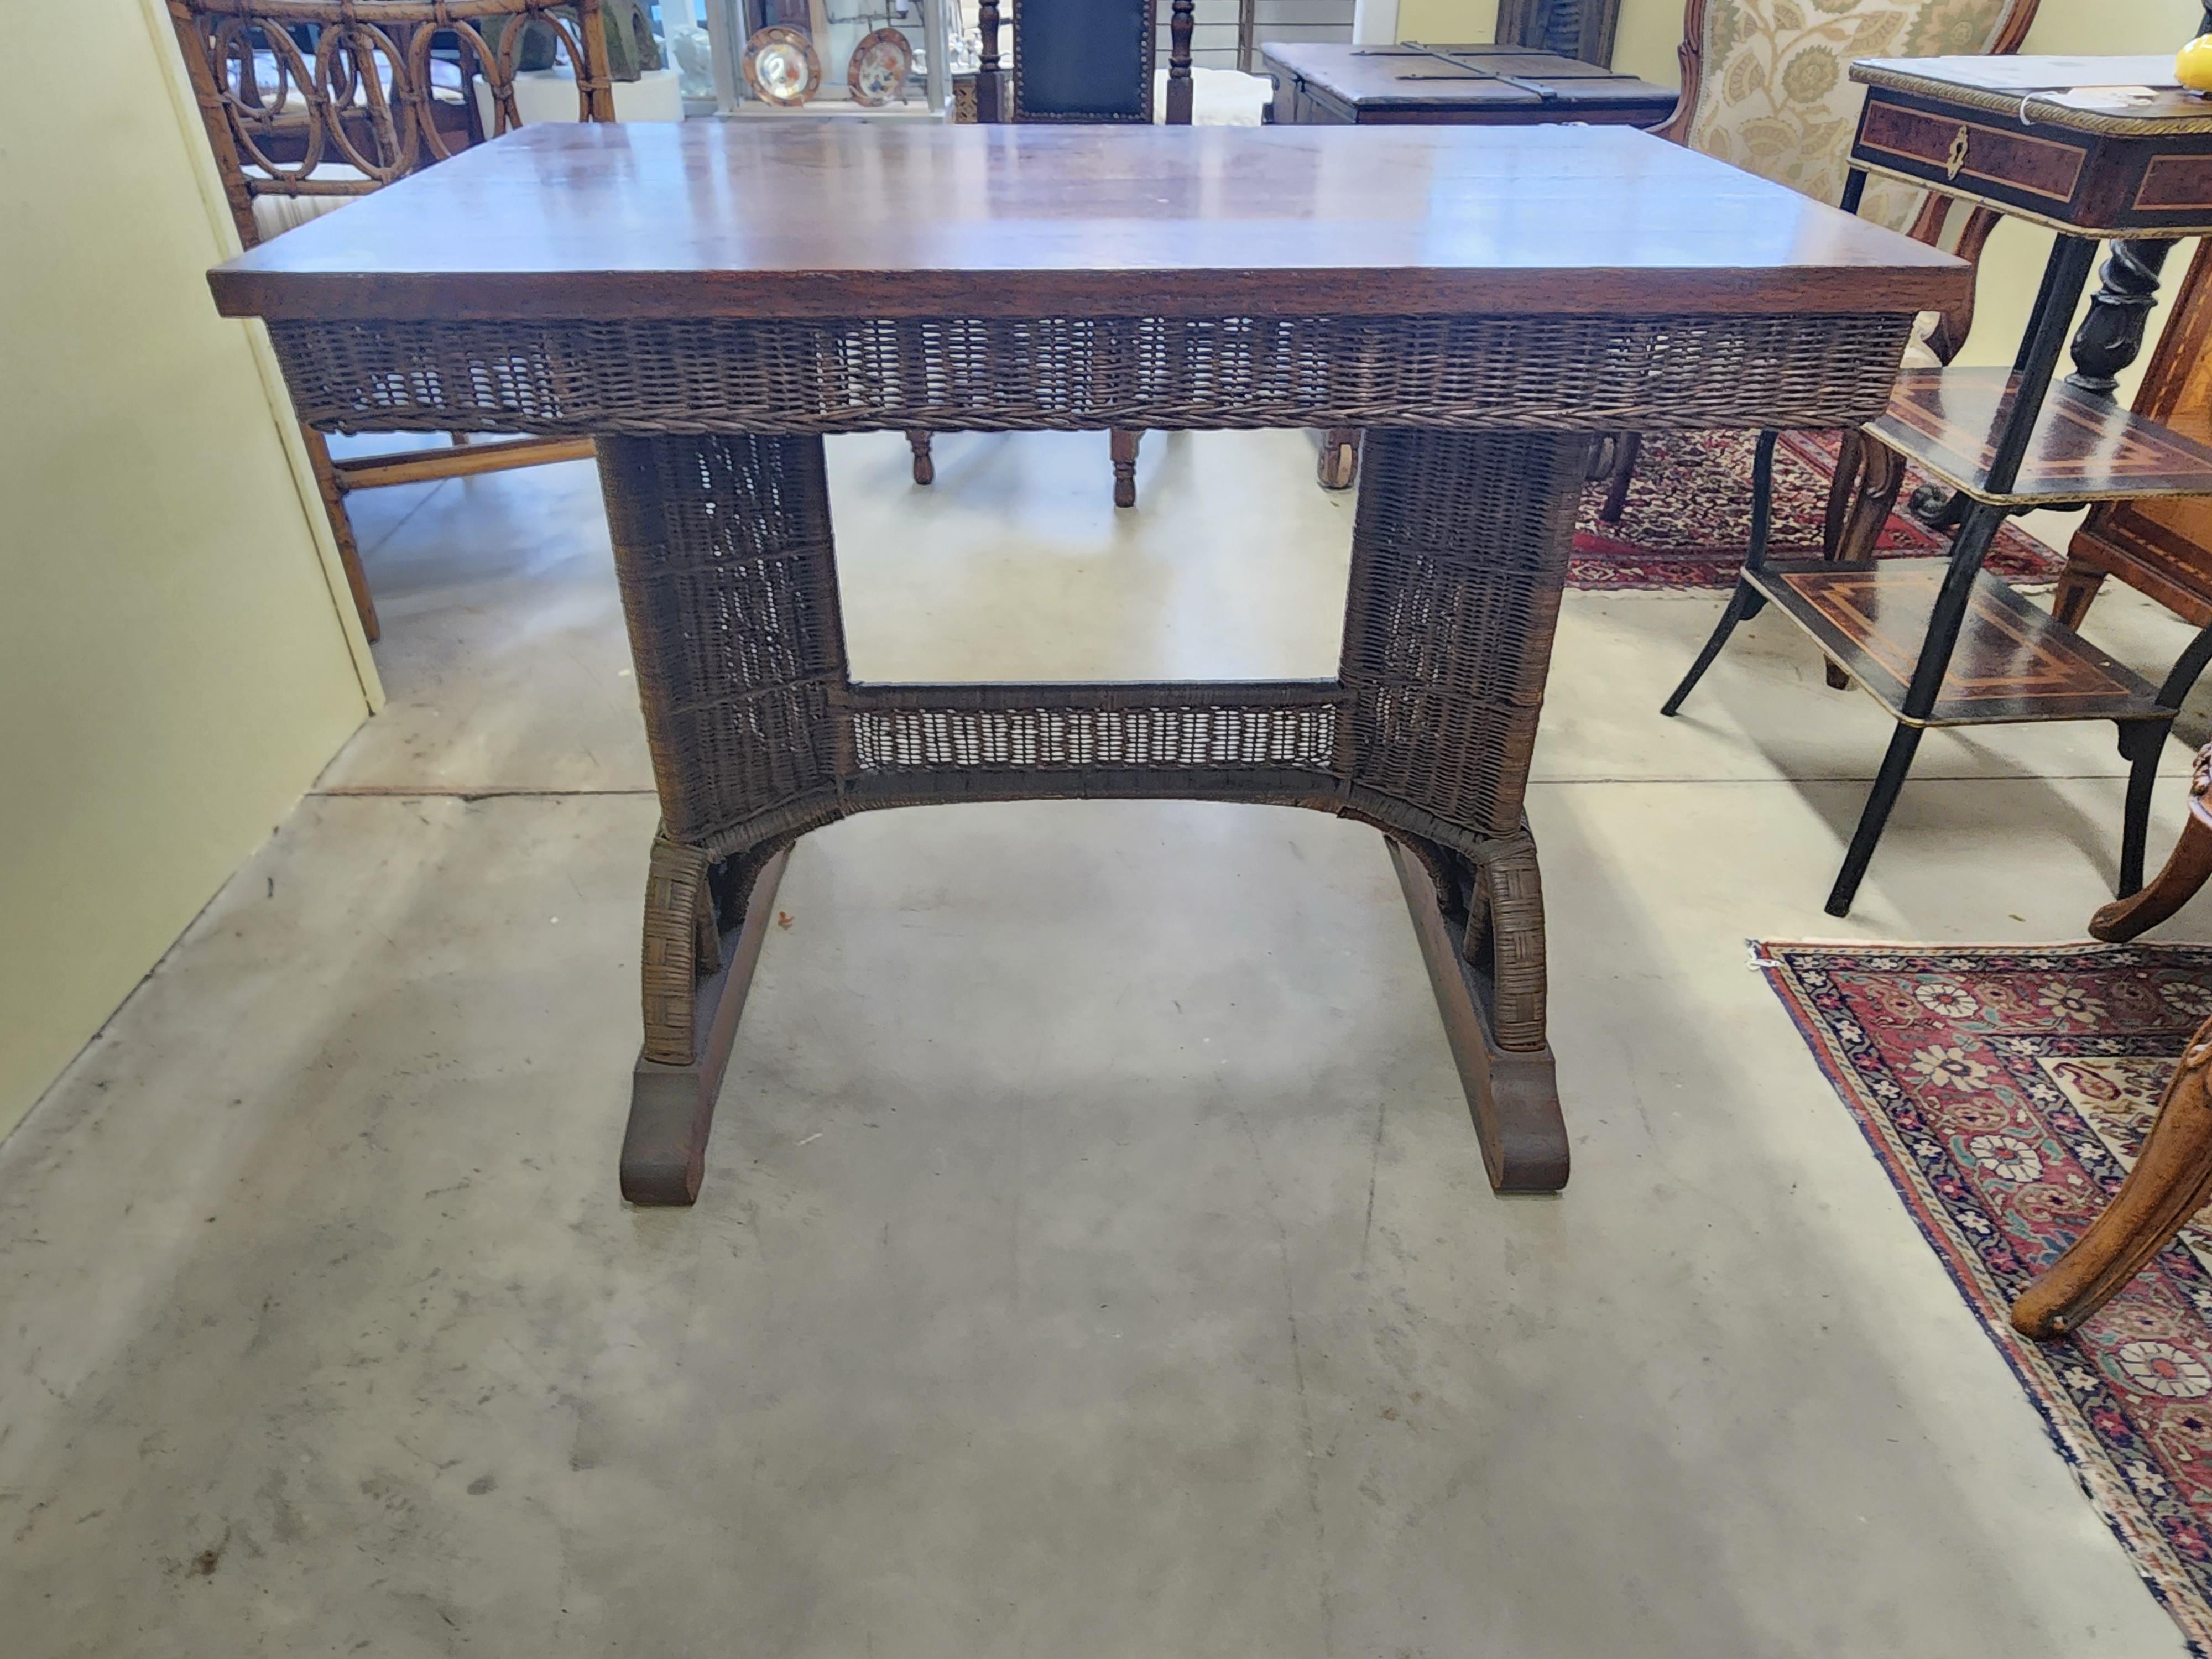 Hand-Crafted Beautiful Architectural Wicker Table with Quartersawn Oak Top